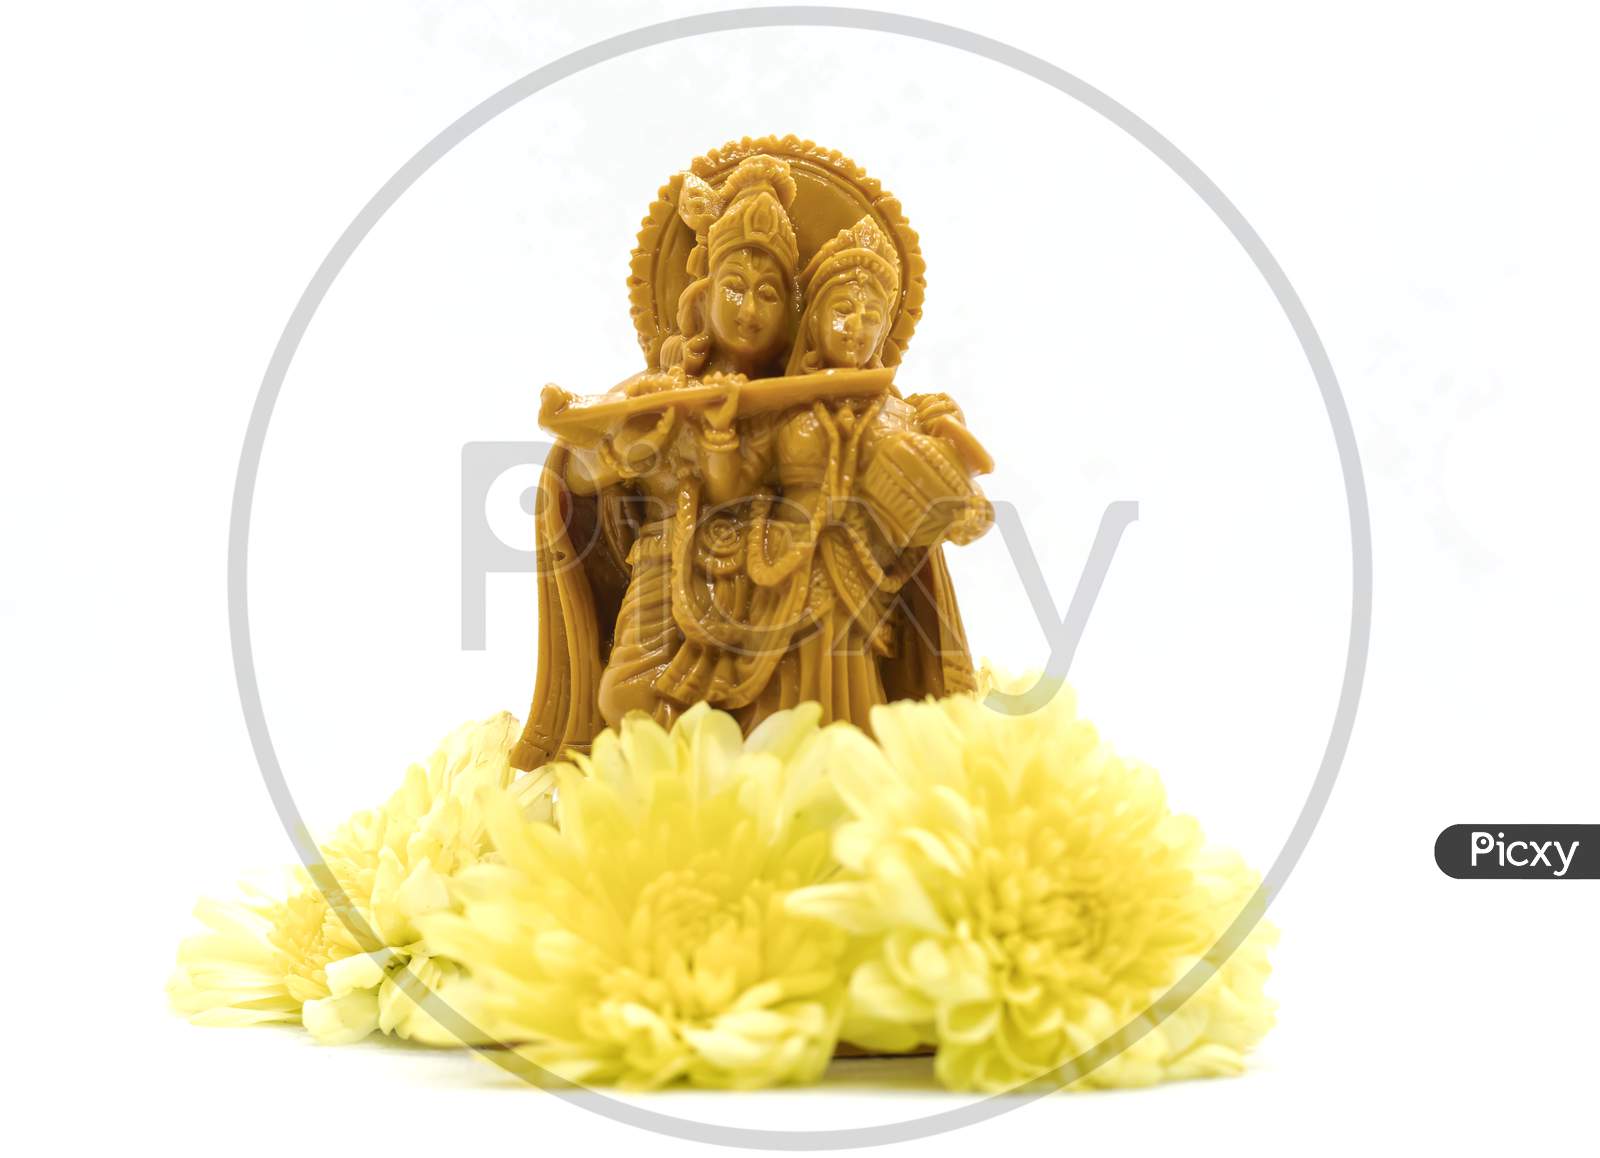 The Statue Of Radha Krishna With Flowers Is Isolated On A White Background